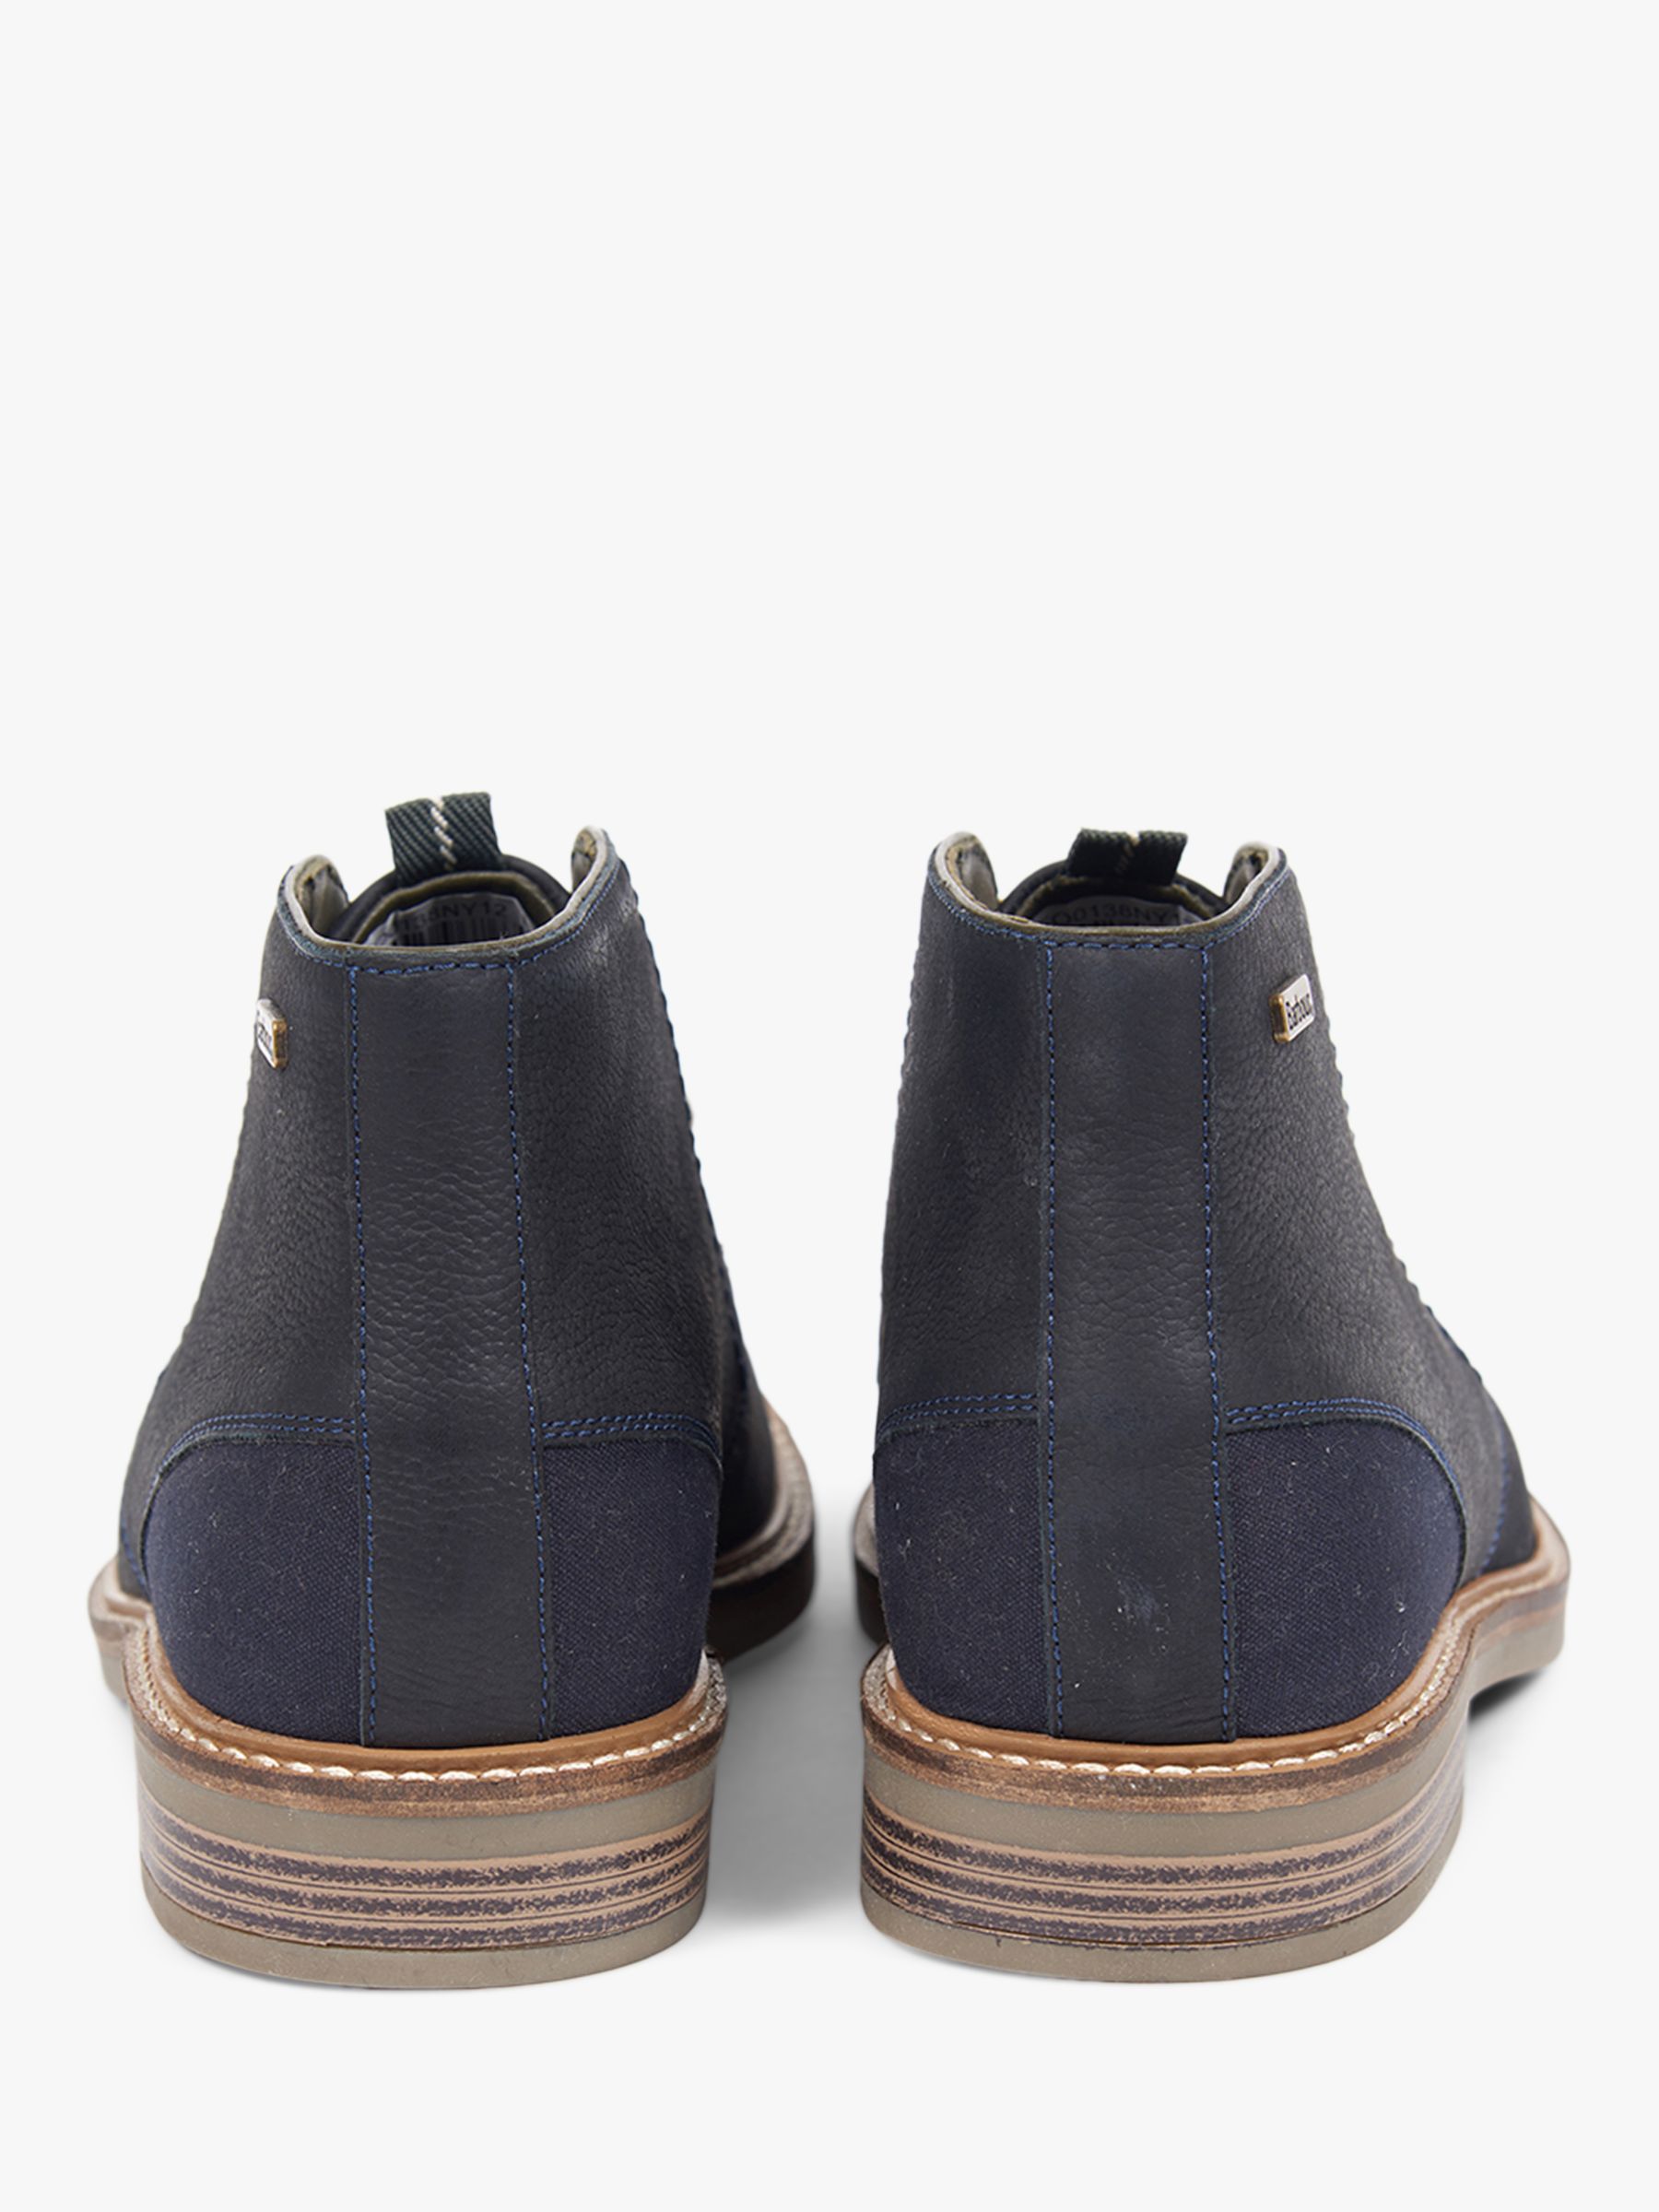 barbour readhead boots navy